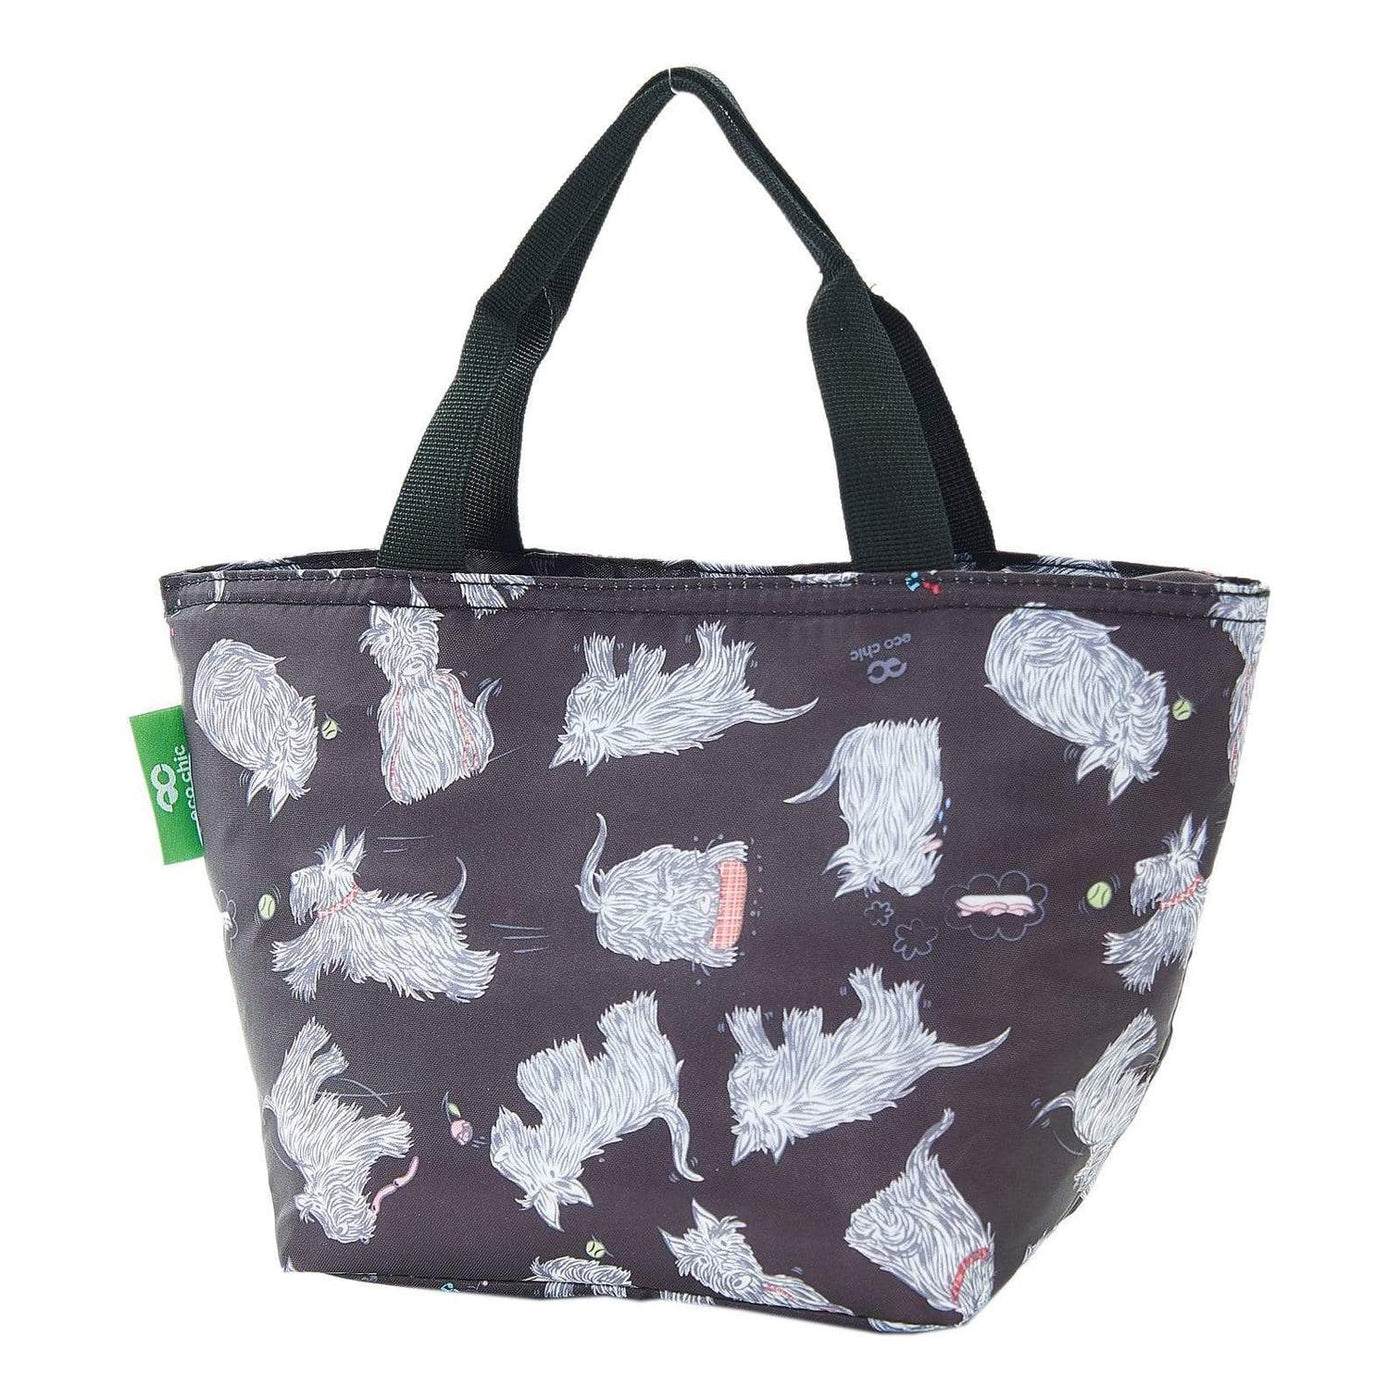 Eco Chic Lightweight Foldable Lunch Bags - Scatty Scottie Dog Black